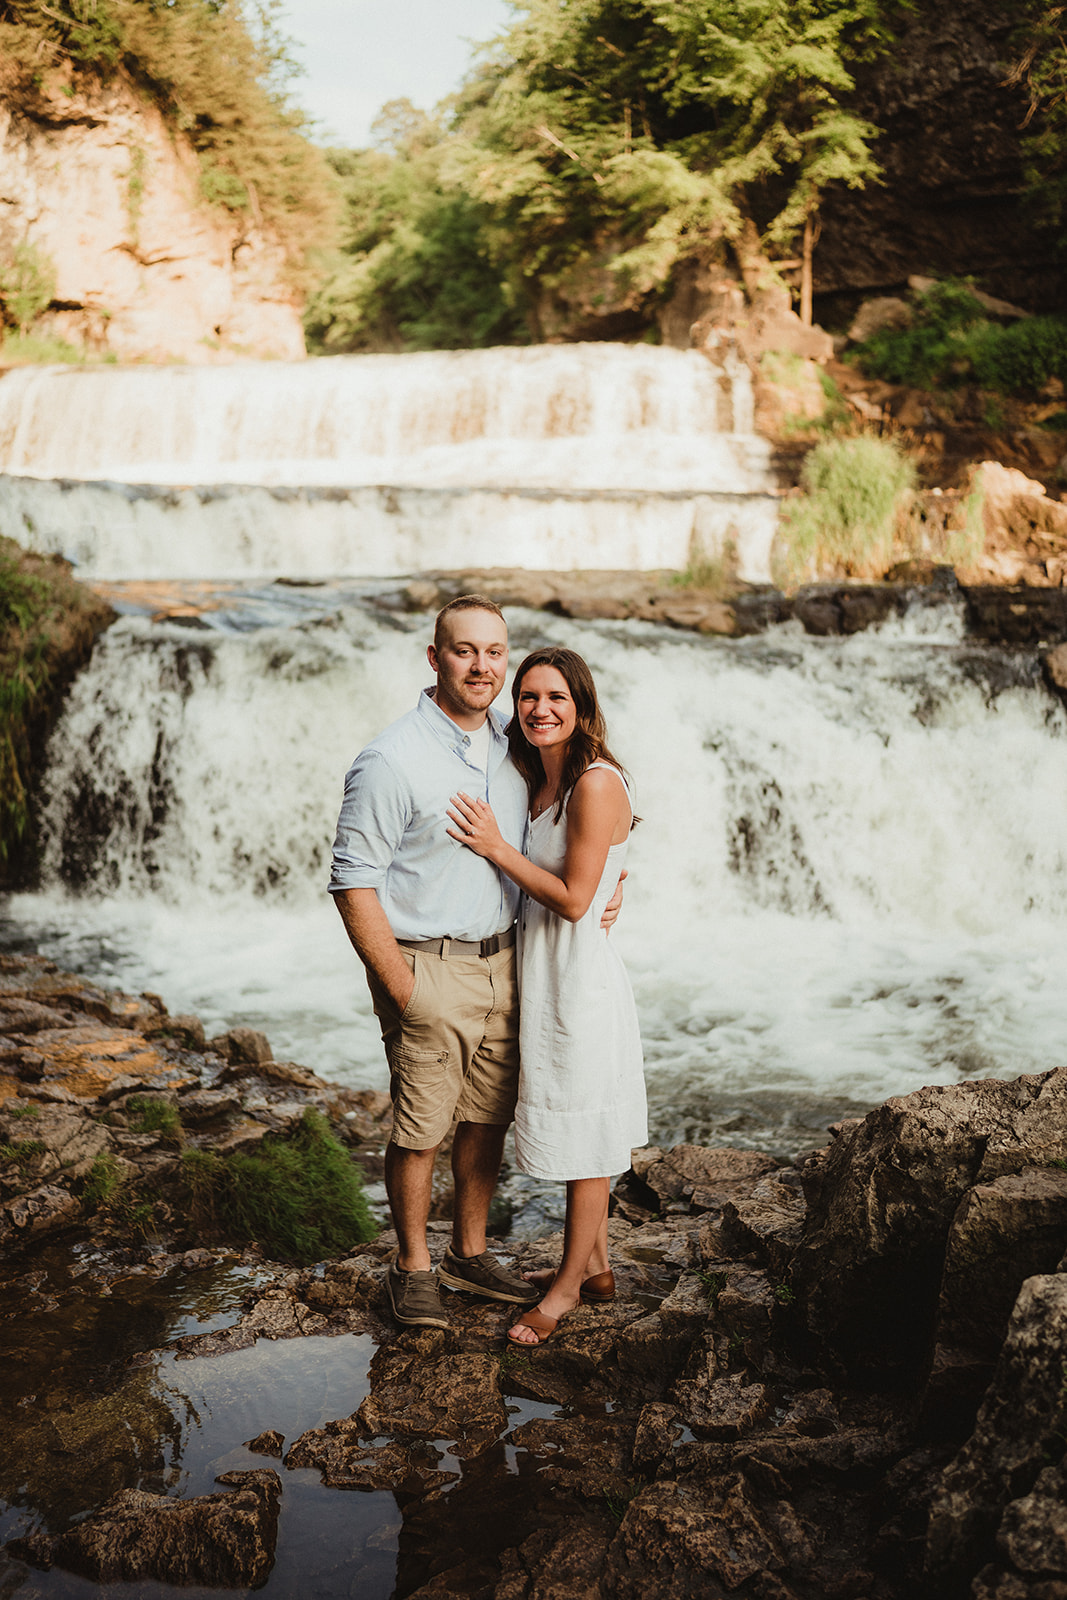 An intimate engaged couple embraces with a stunning waterfall as their backdrop.